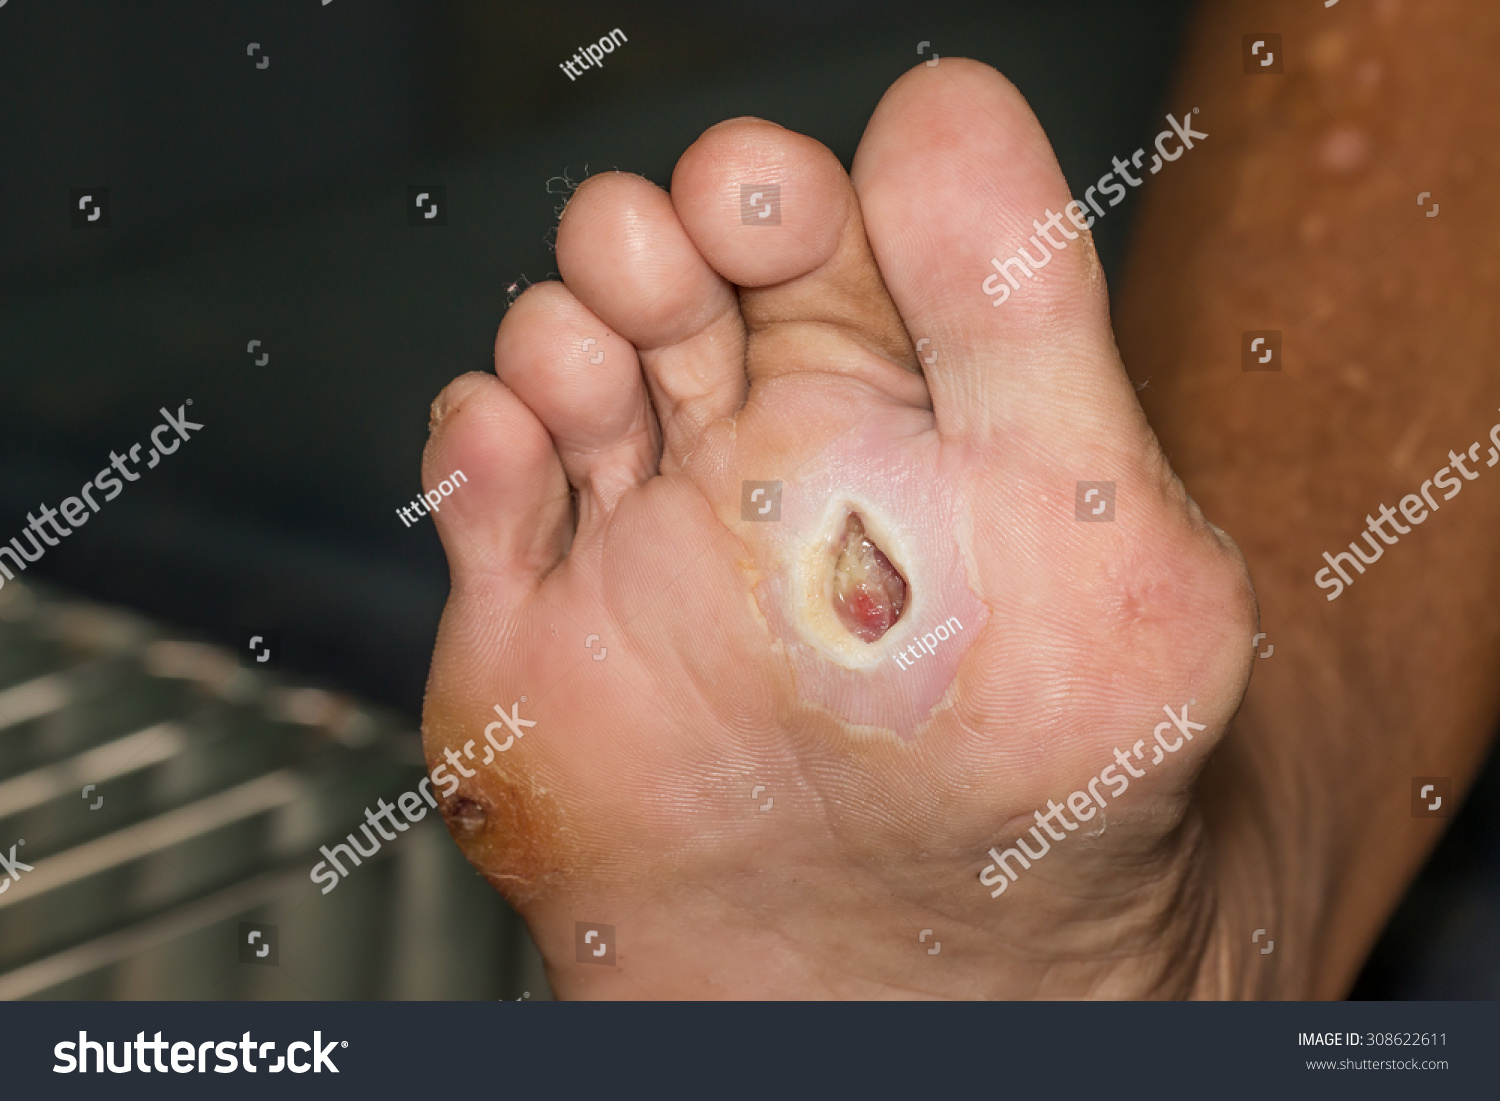 Edit Images Free Online - wound of diabetic | Shutterstock Editor